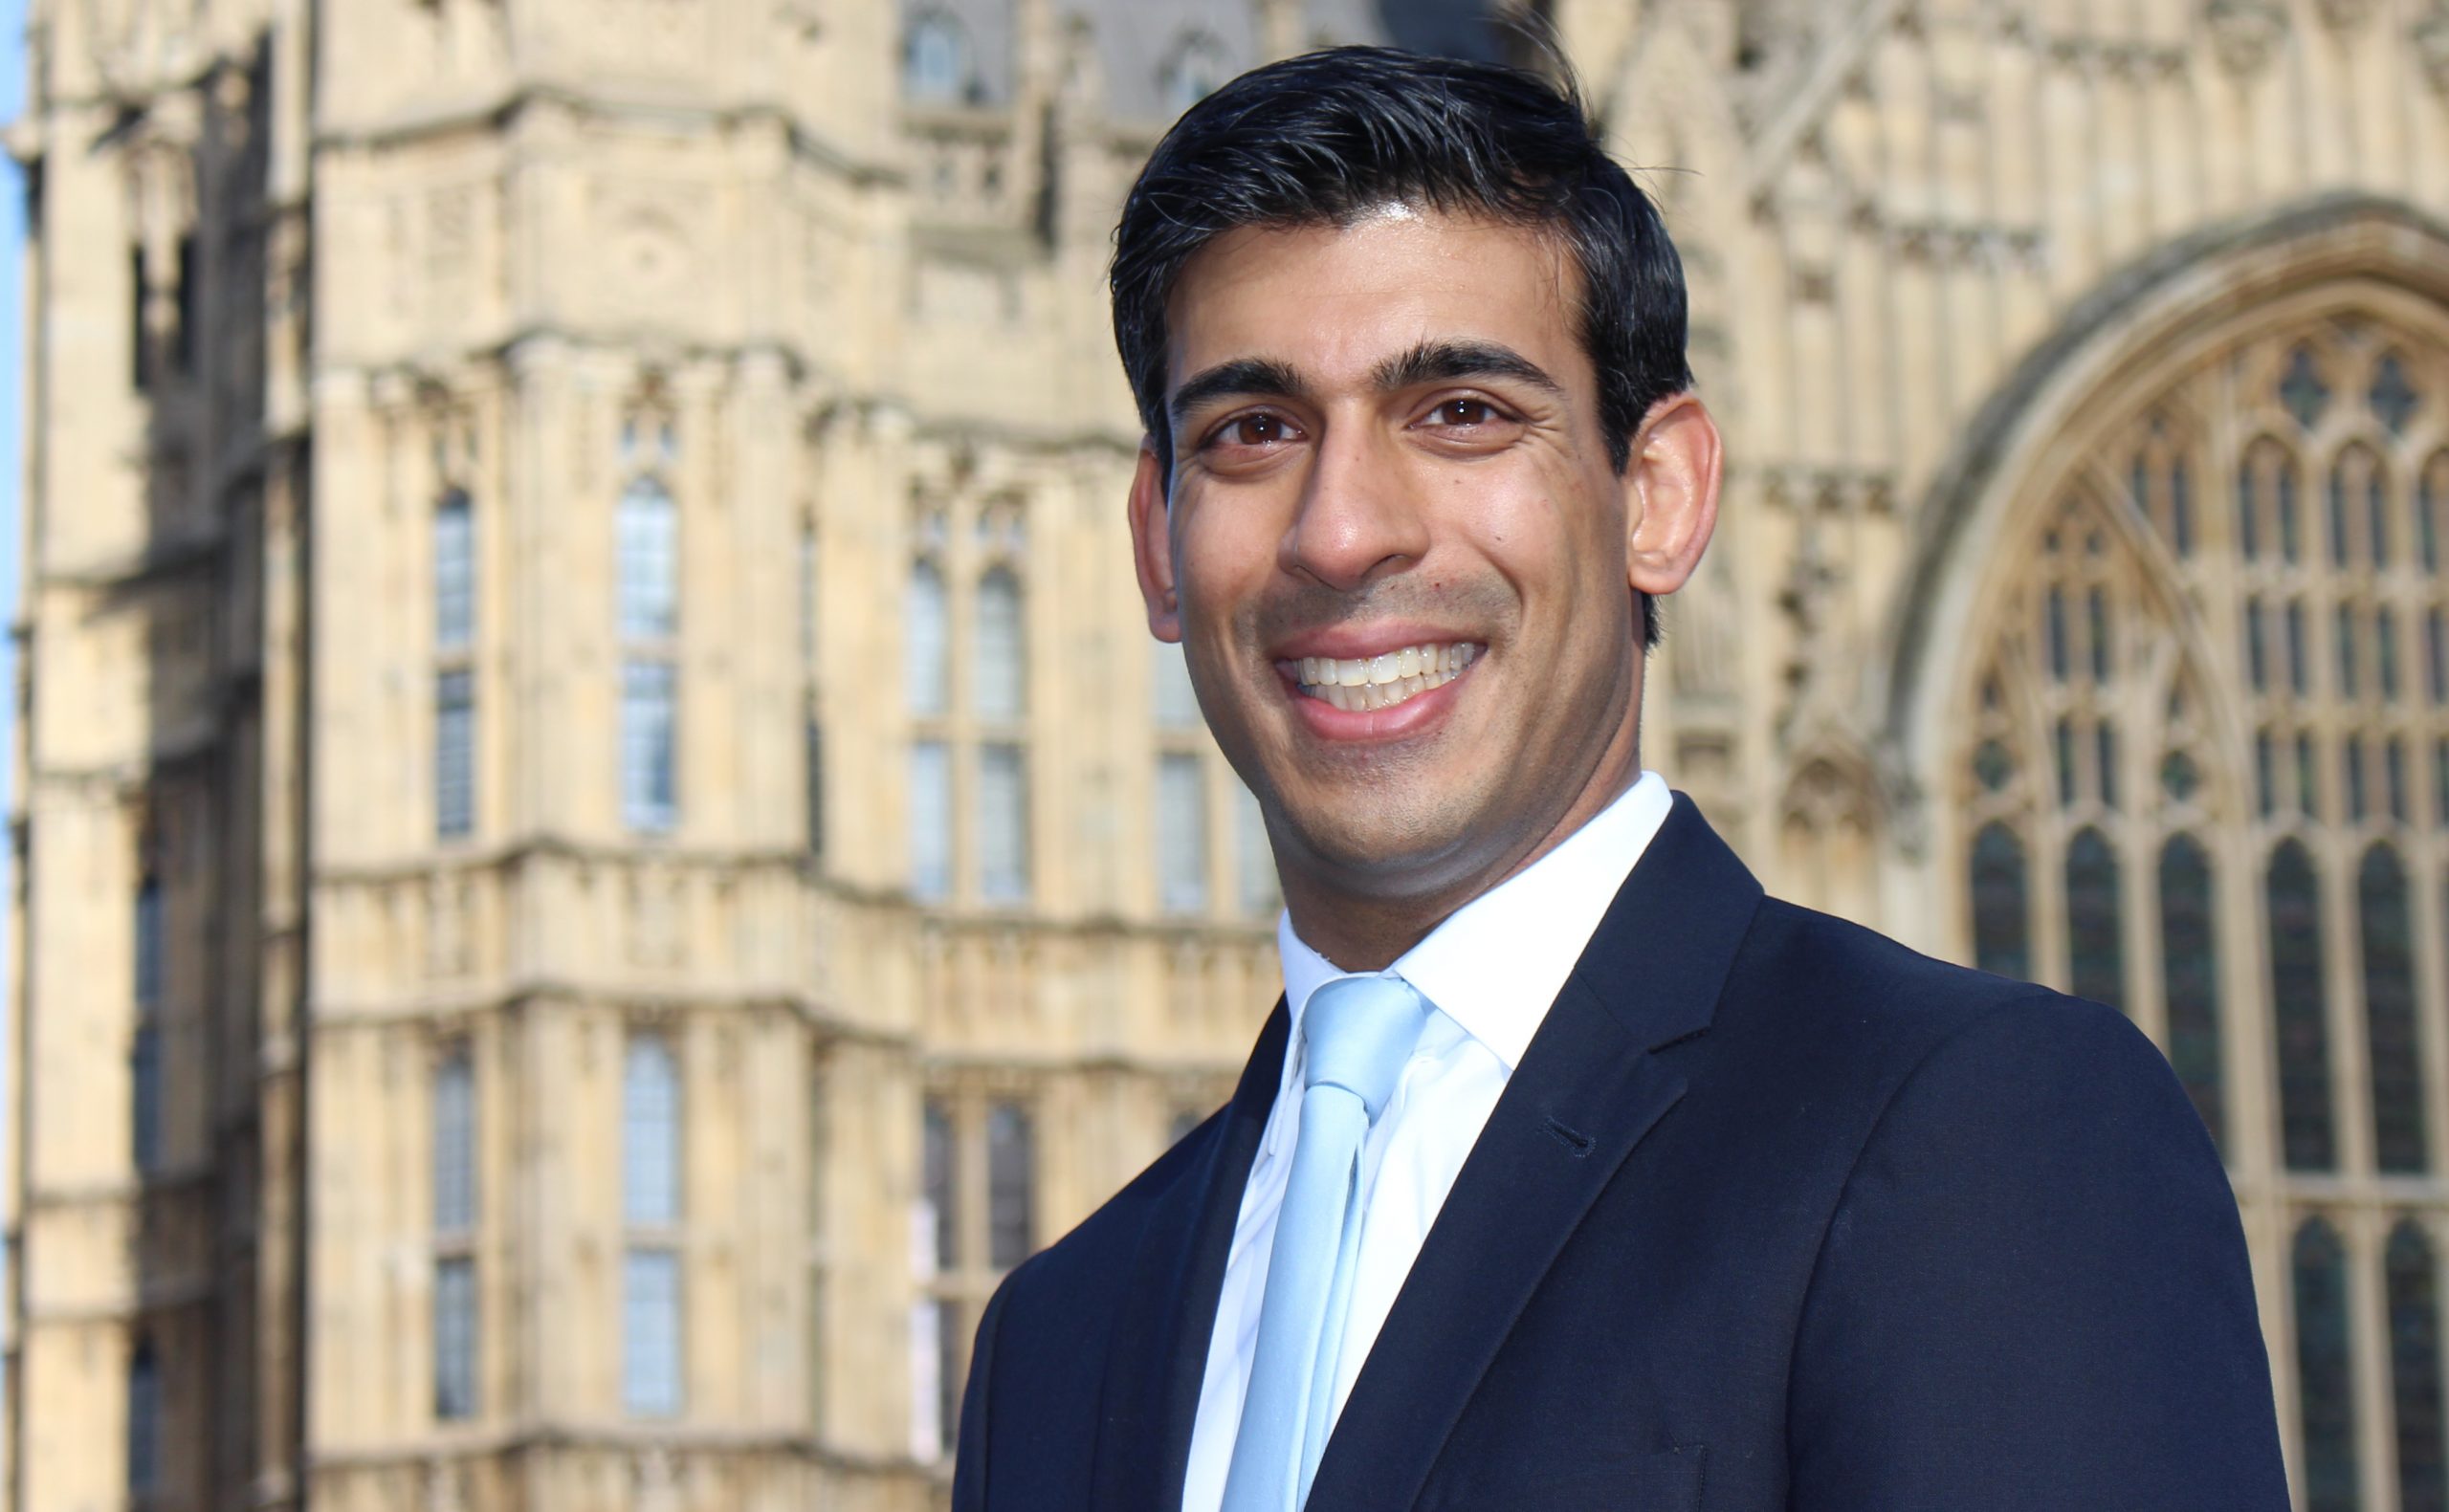 Rishi Sunak smiling at the camera. He is wearing a black suit with a light blue tie. Behind him is the Houses of Parliament.